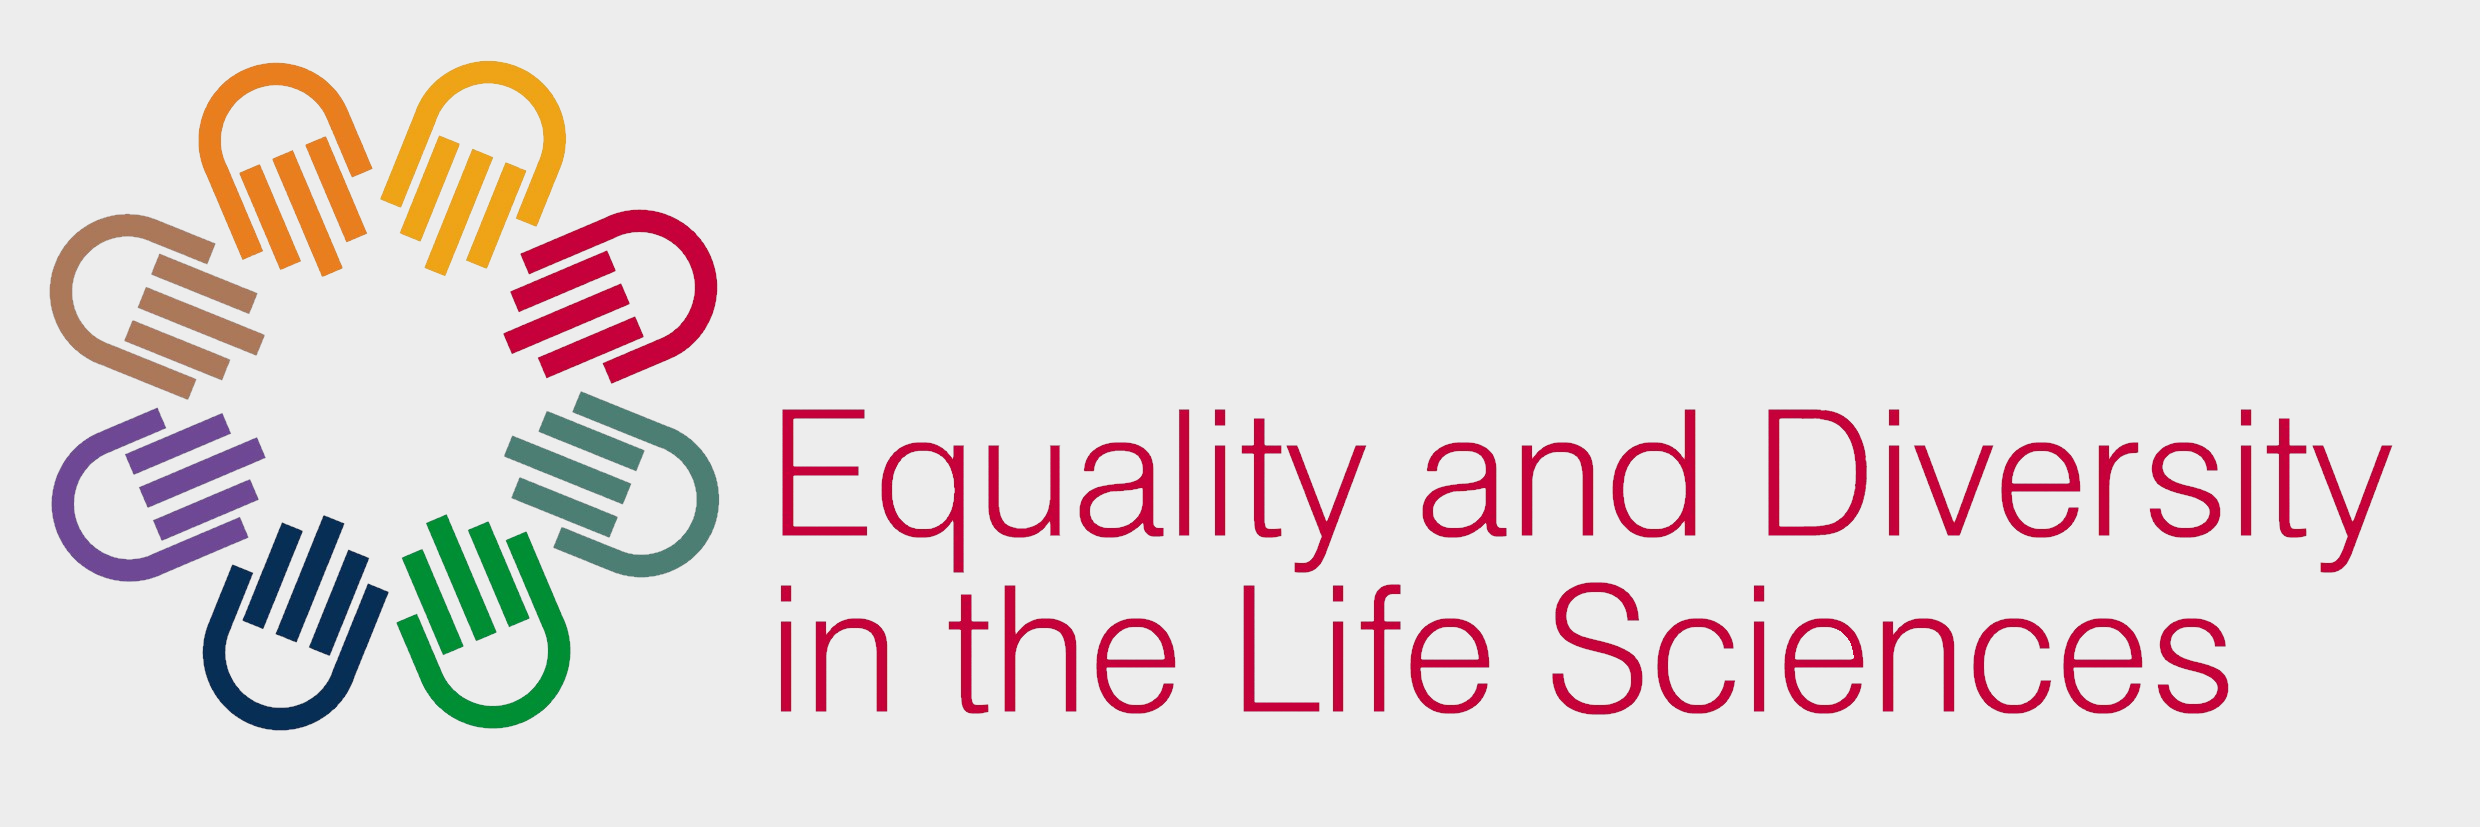 Equality and Diversity in the Life Sciences logo